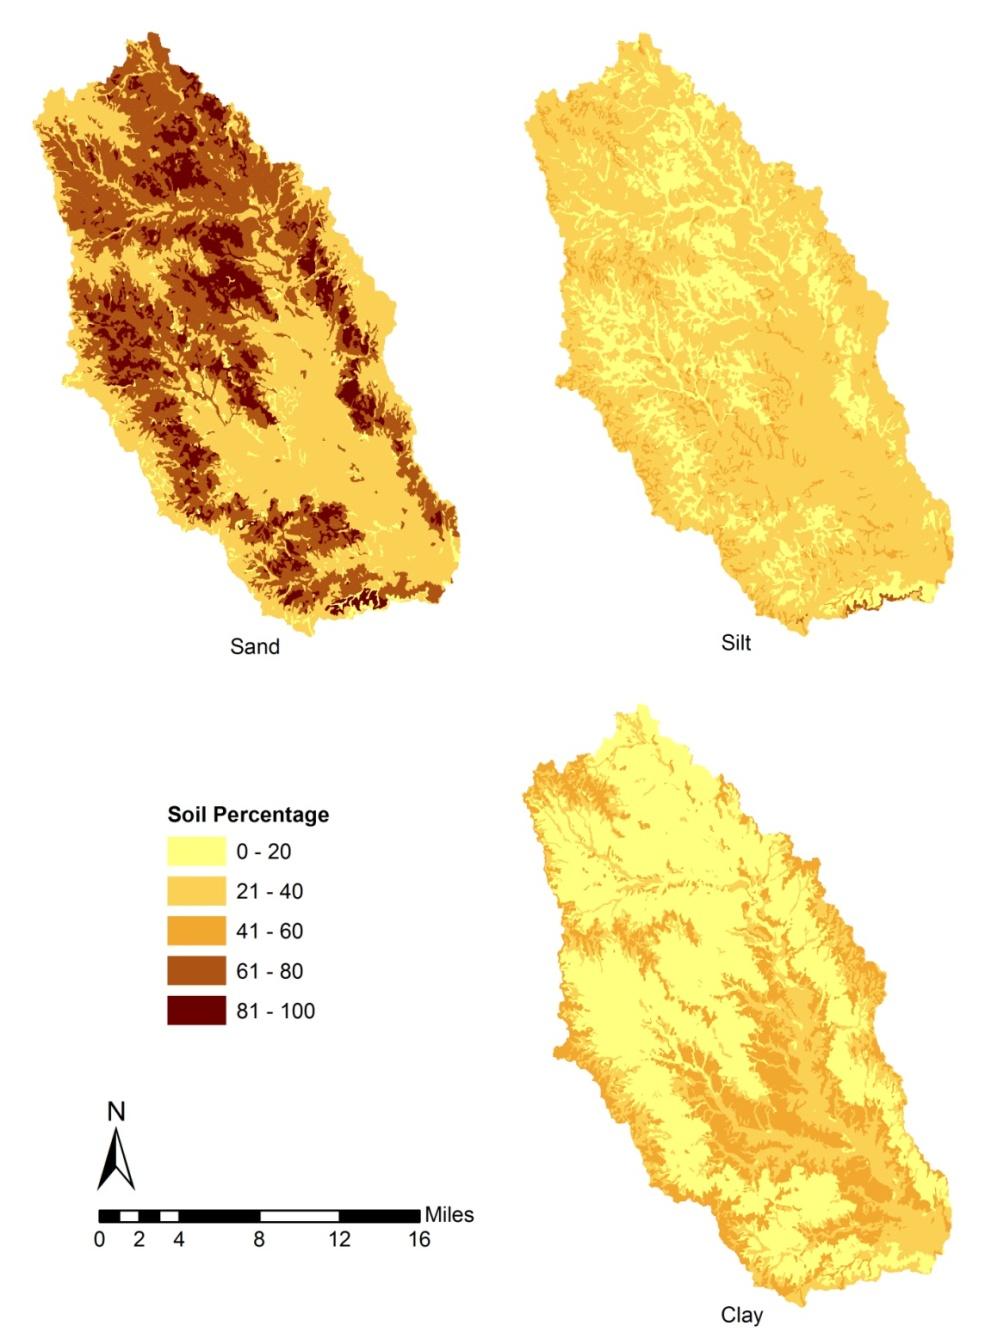 Chapter 8 - Surface Erosion and Sediment Routing Studies Figure 52. Percentage of Surface Soil Components in UNBRW (from the SSURGO database) segment.